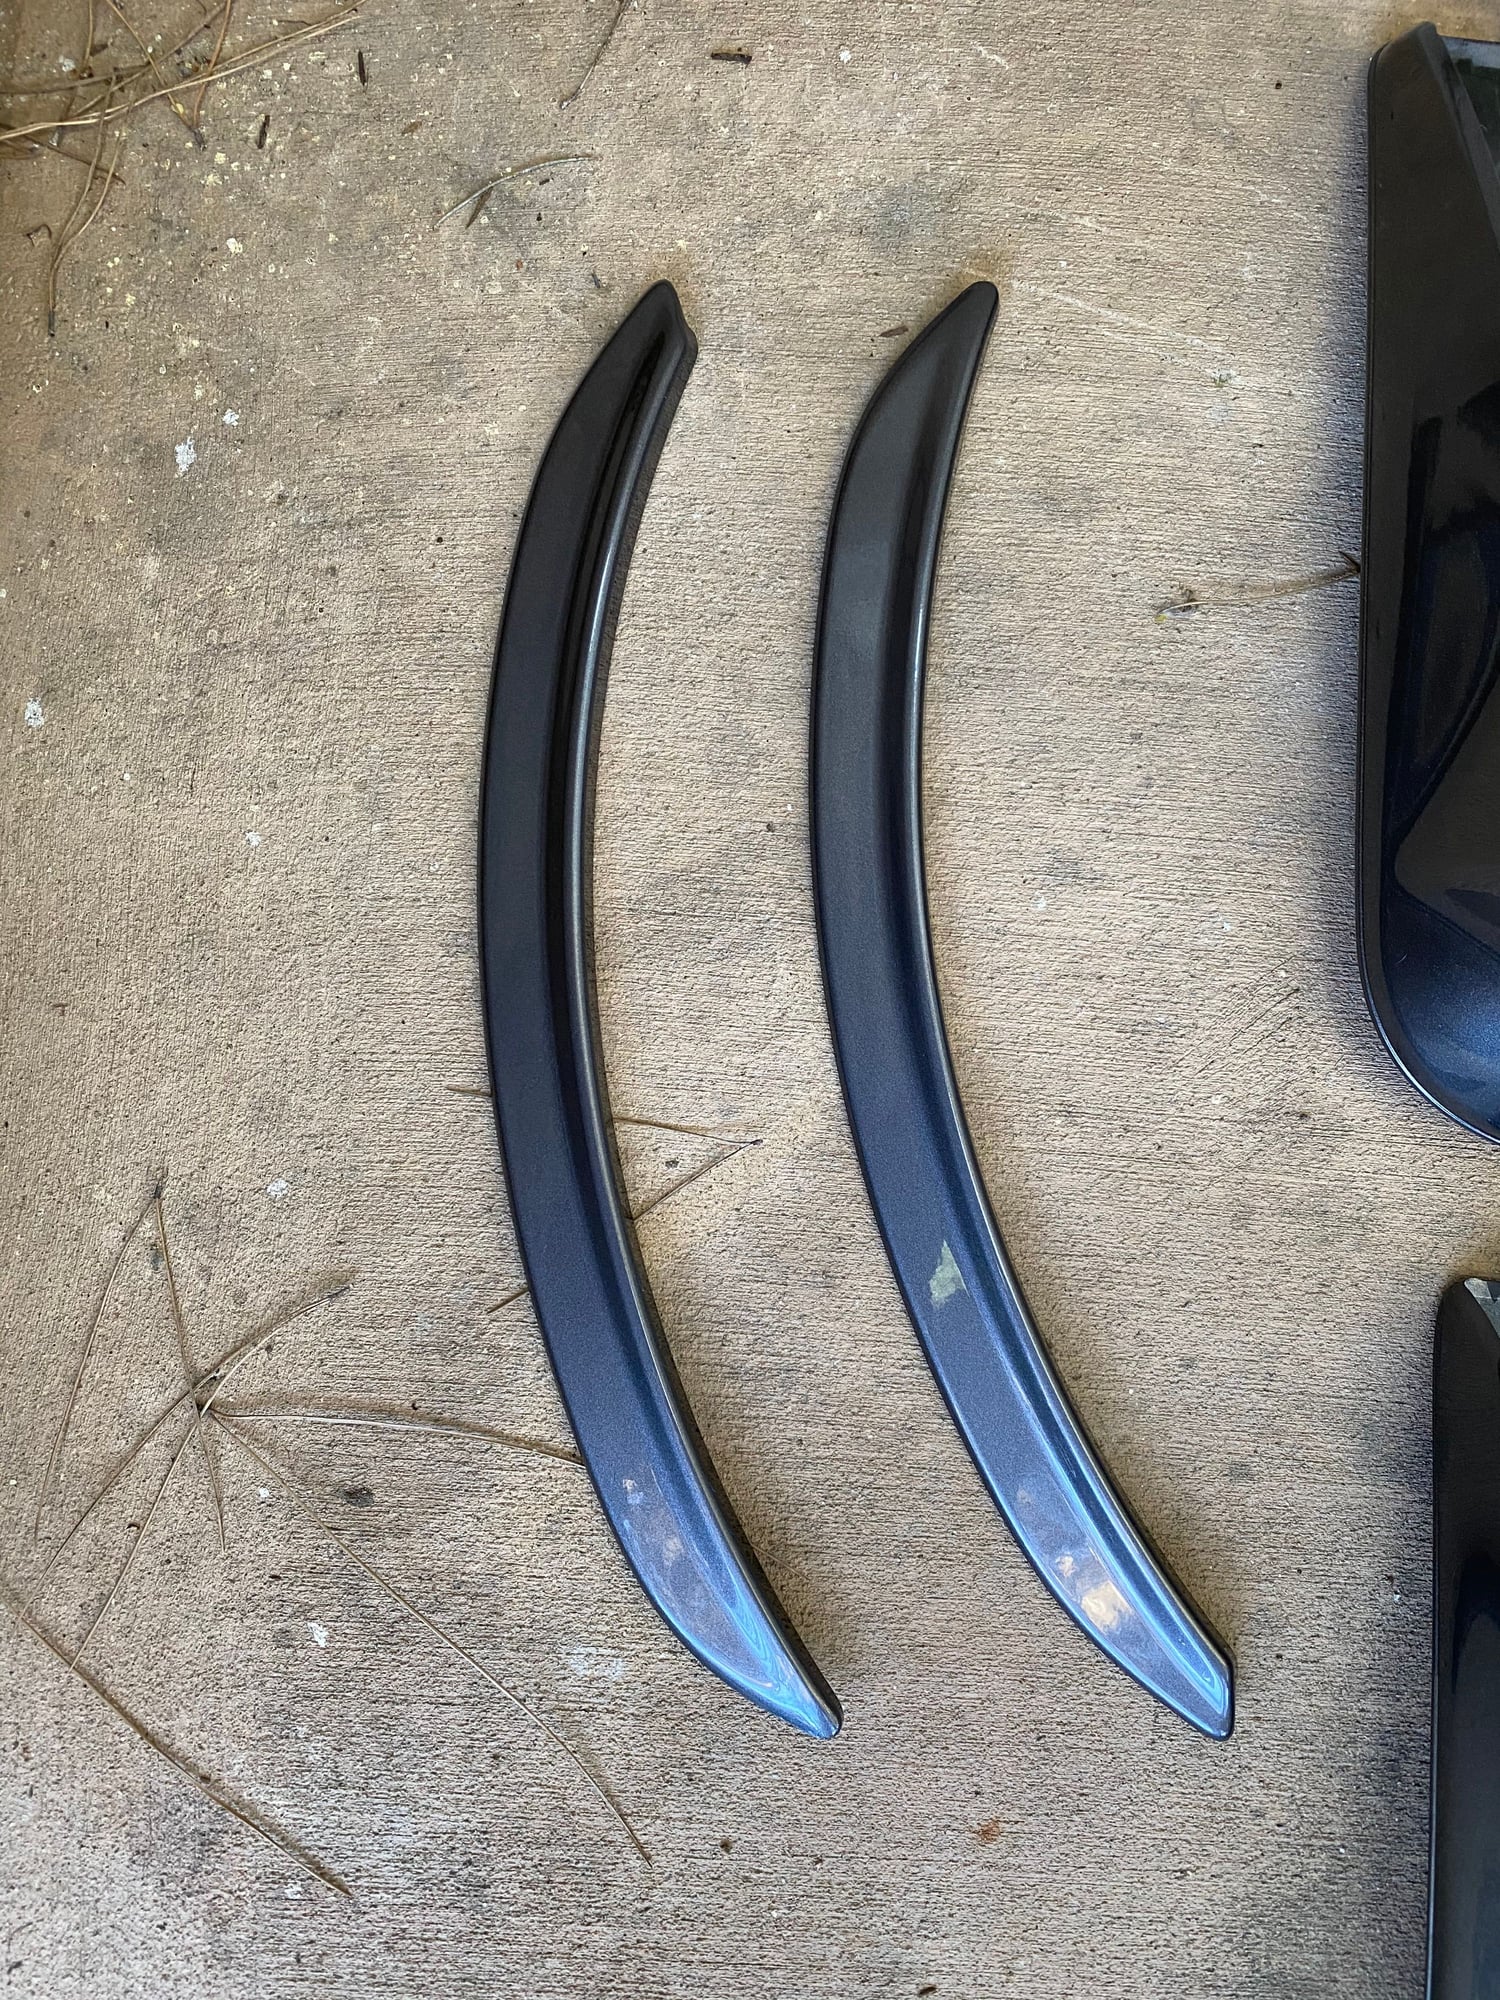 Exterior Body Parts - Gs-f jdm rear fender flare - Used - 2016 to 2020 Lexus GS F - San Diego, CA CA, United States